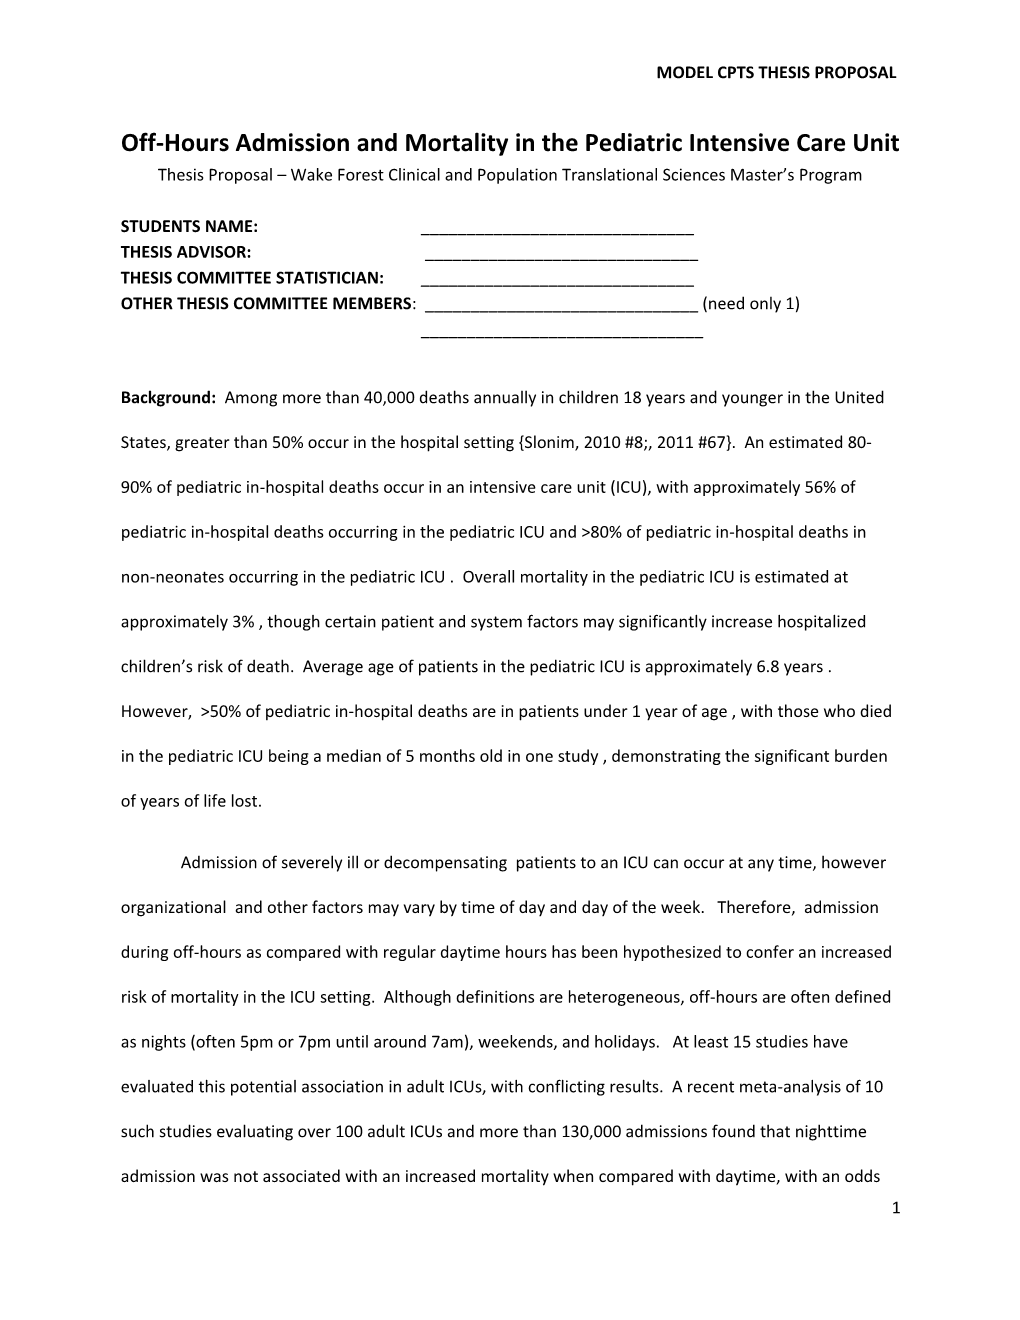 Model Cpts Thesis Proposal